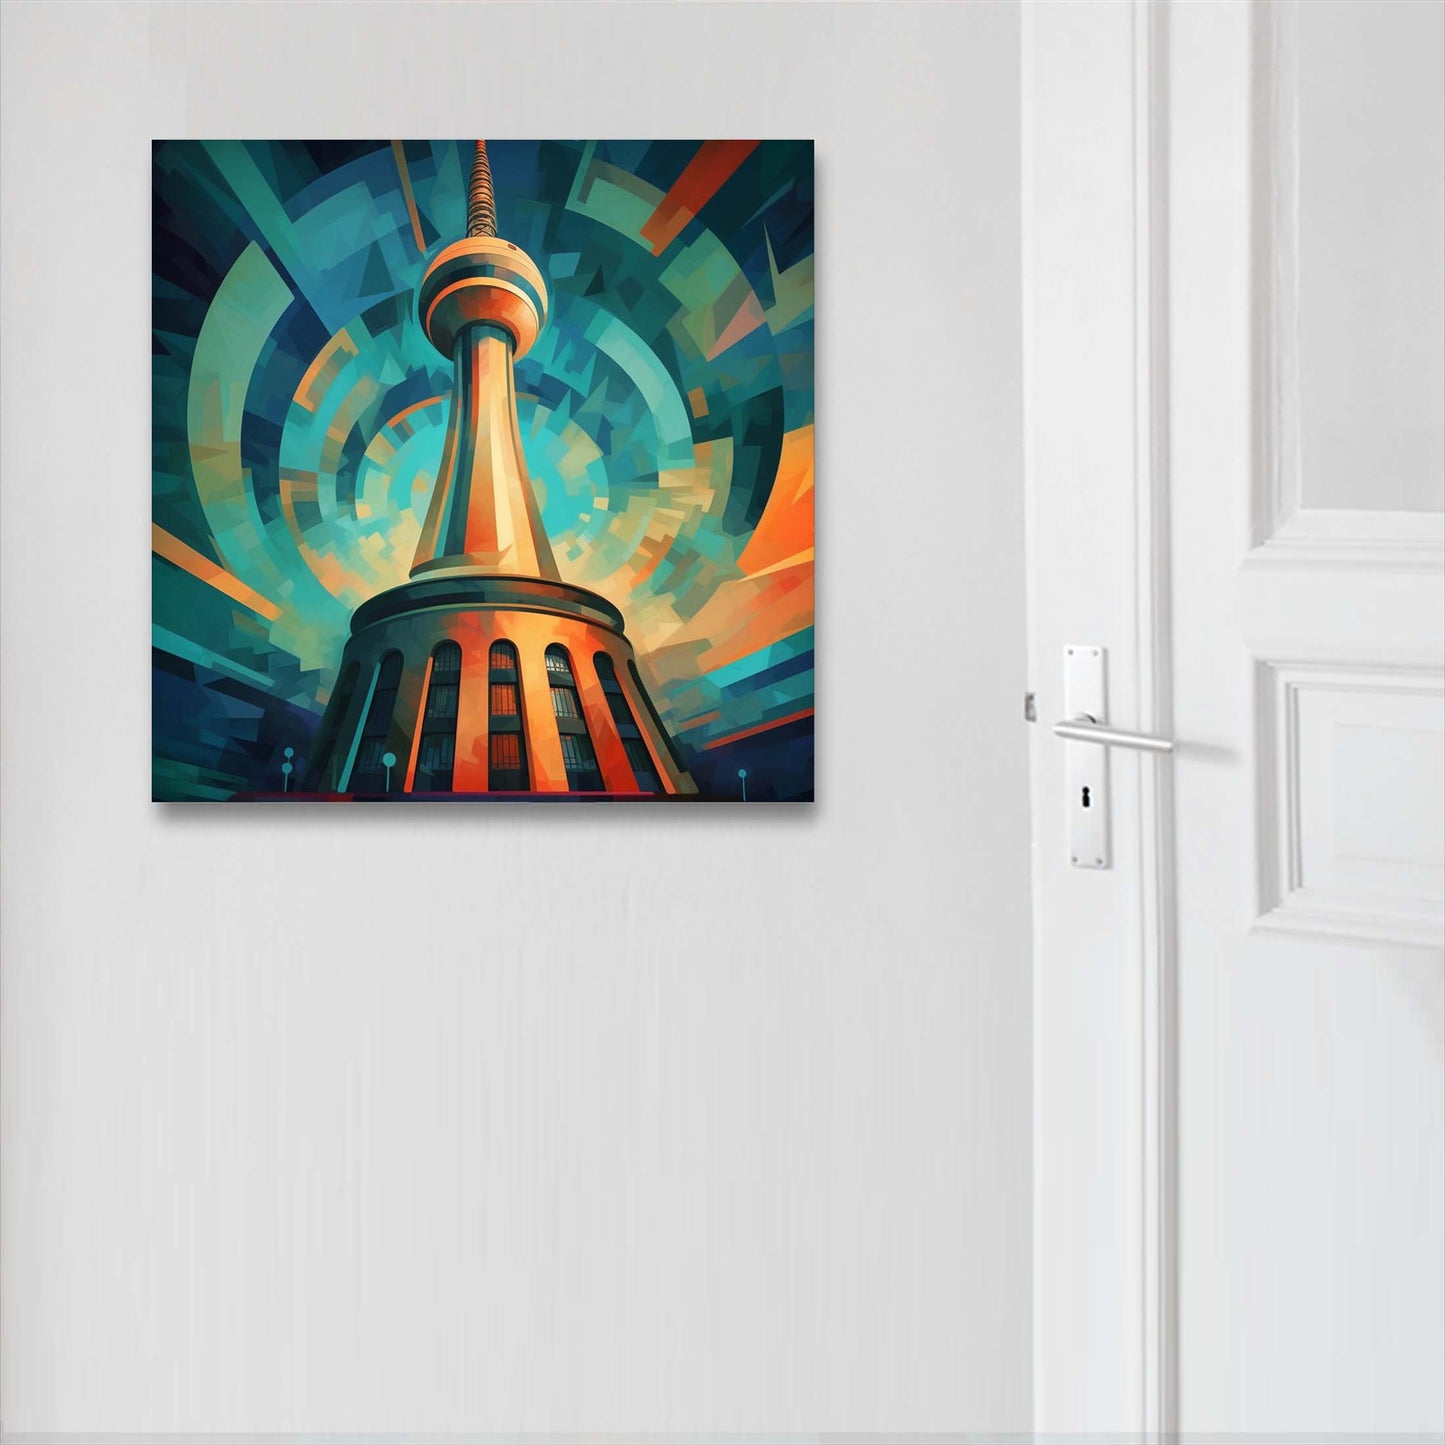 Berlin TV tower - mural in the style of futurism